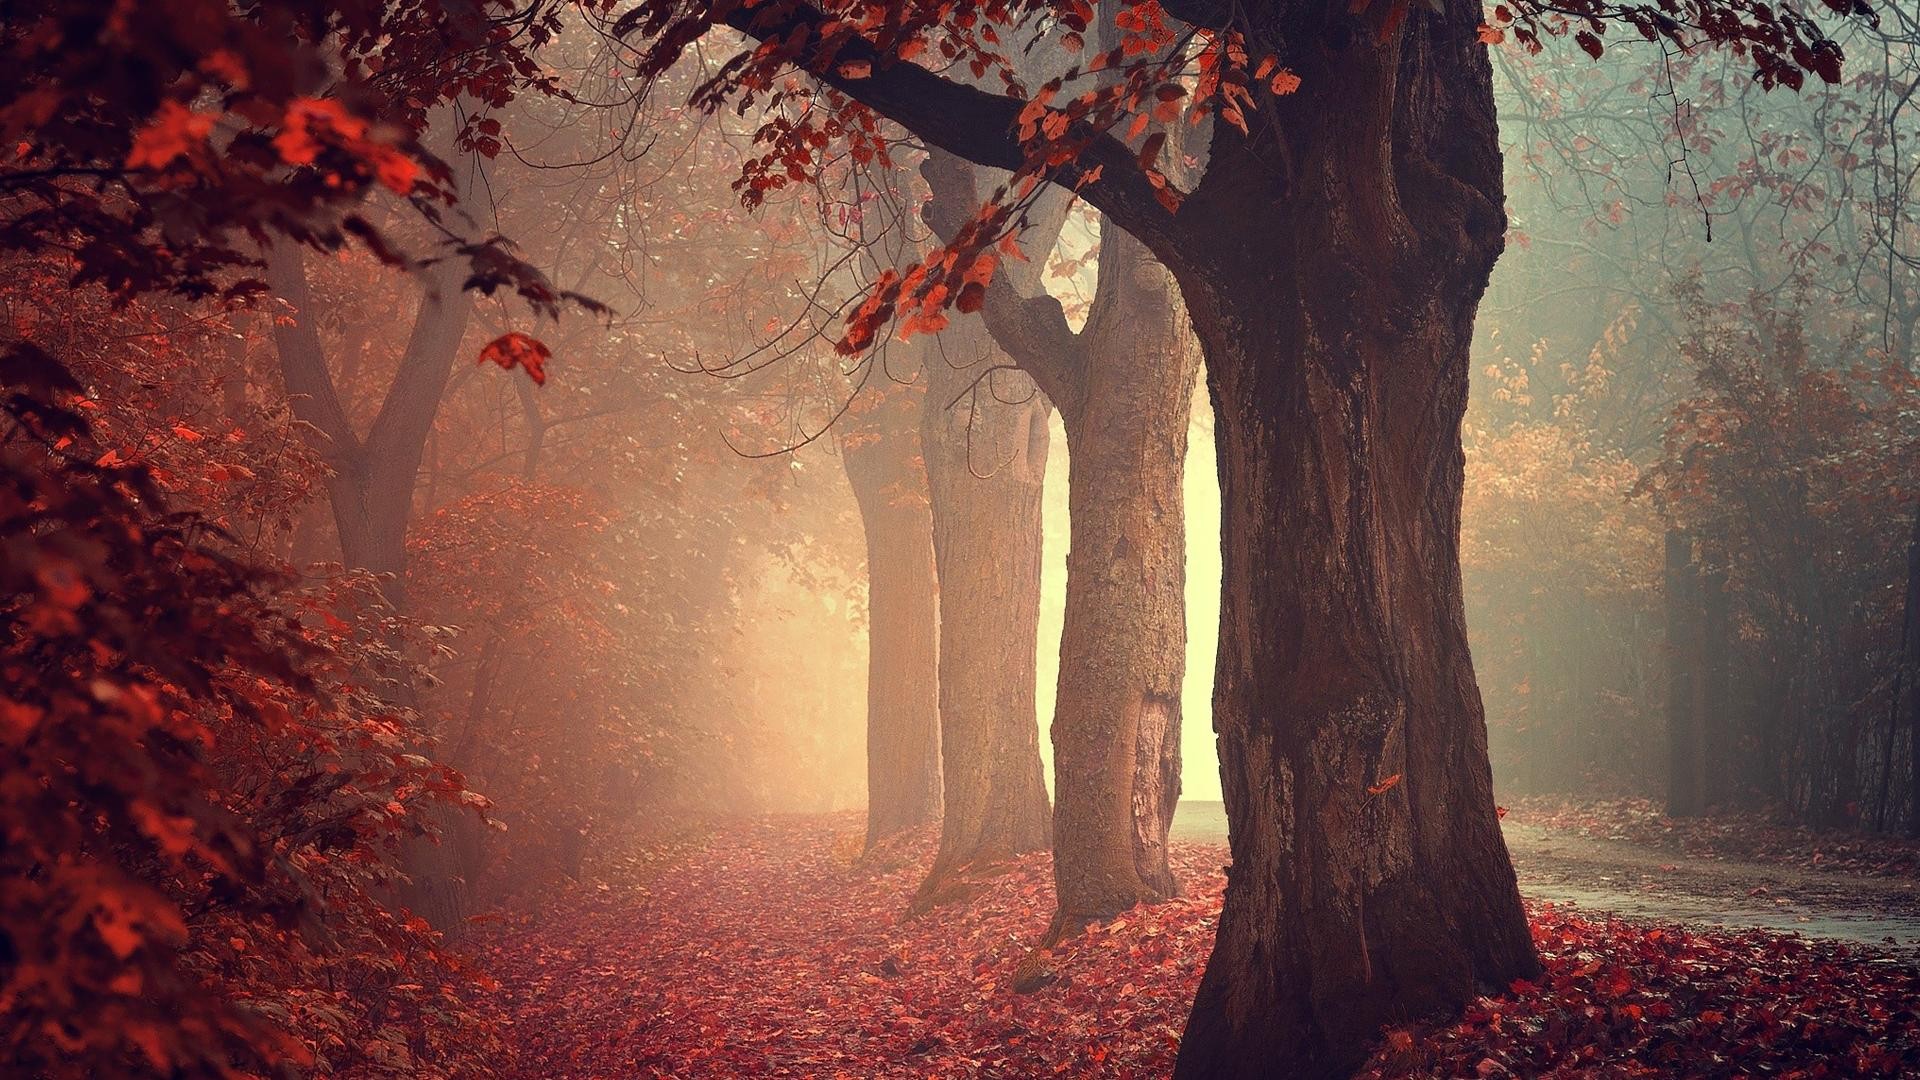 General 1920x1080 fall mist trees nature leaves forest fallen leaves